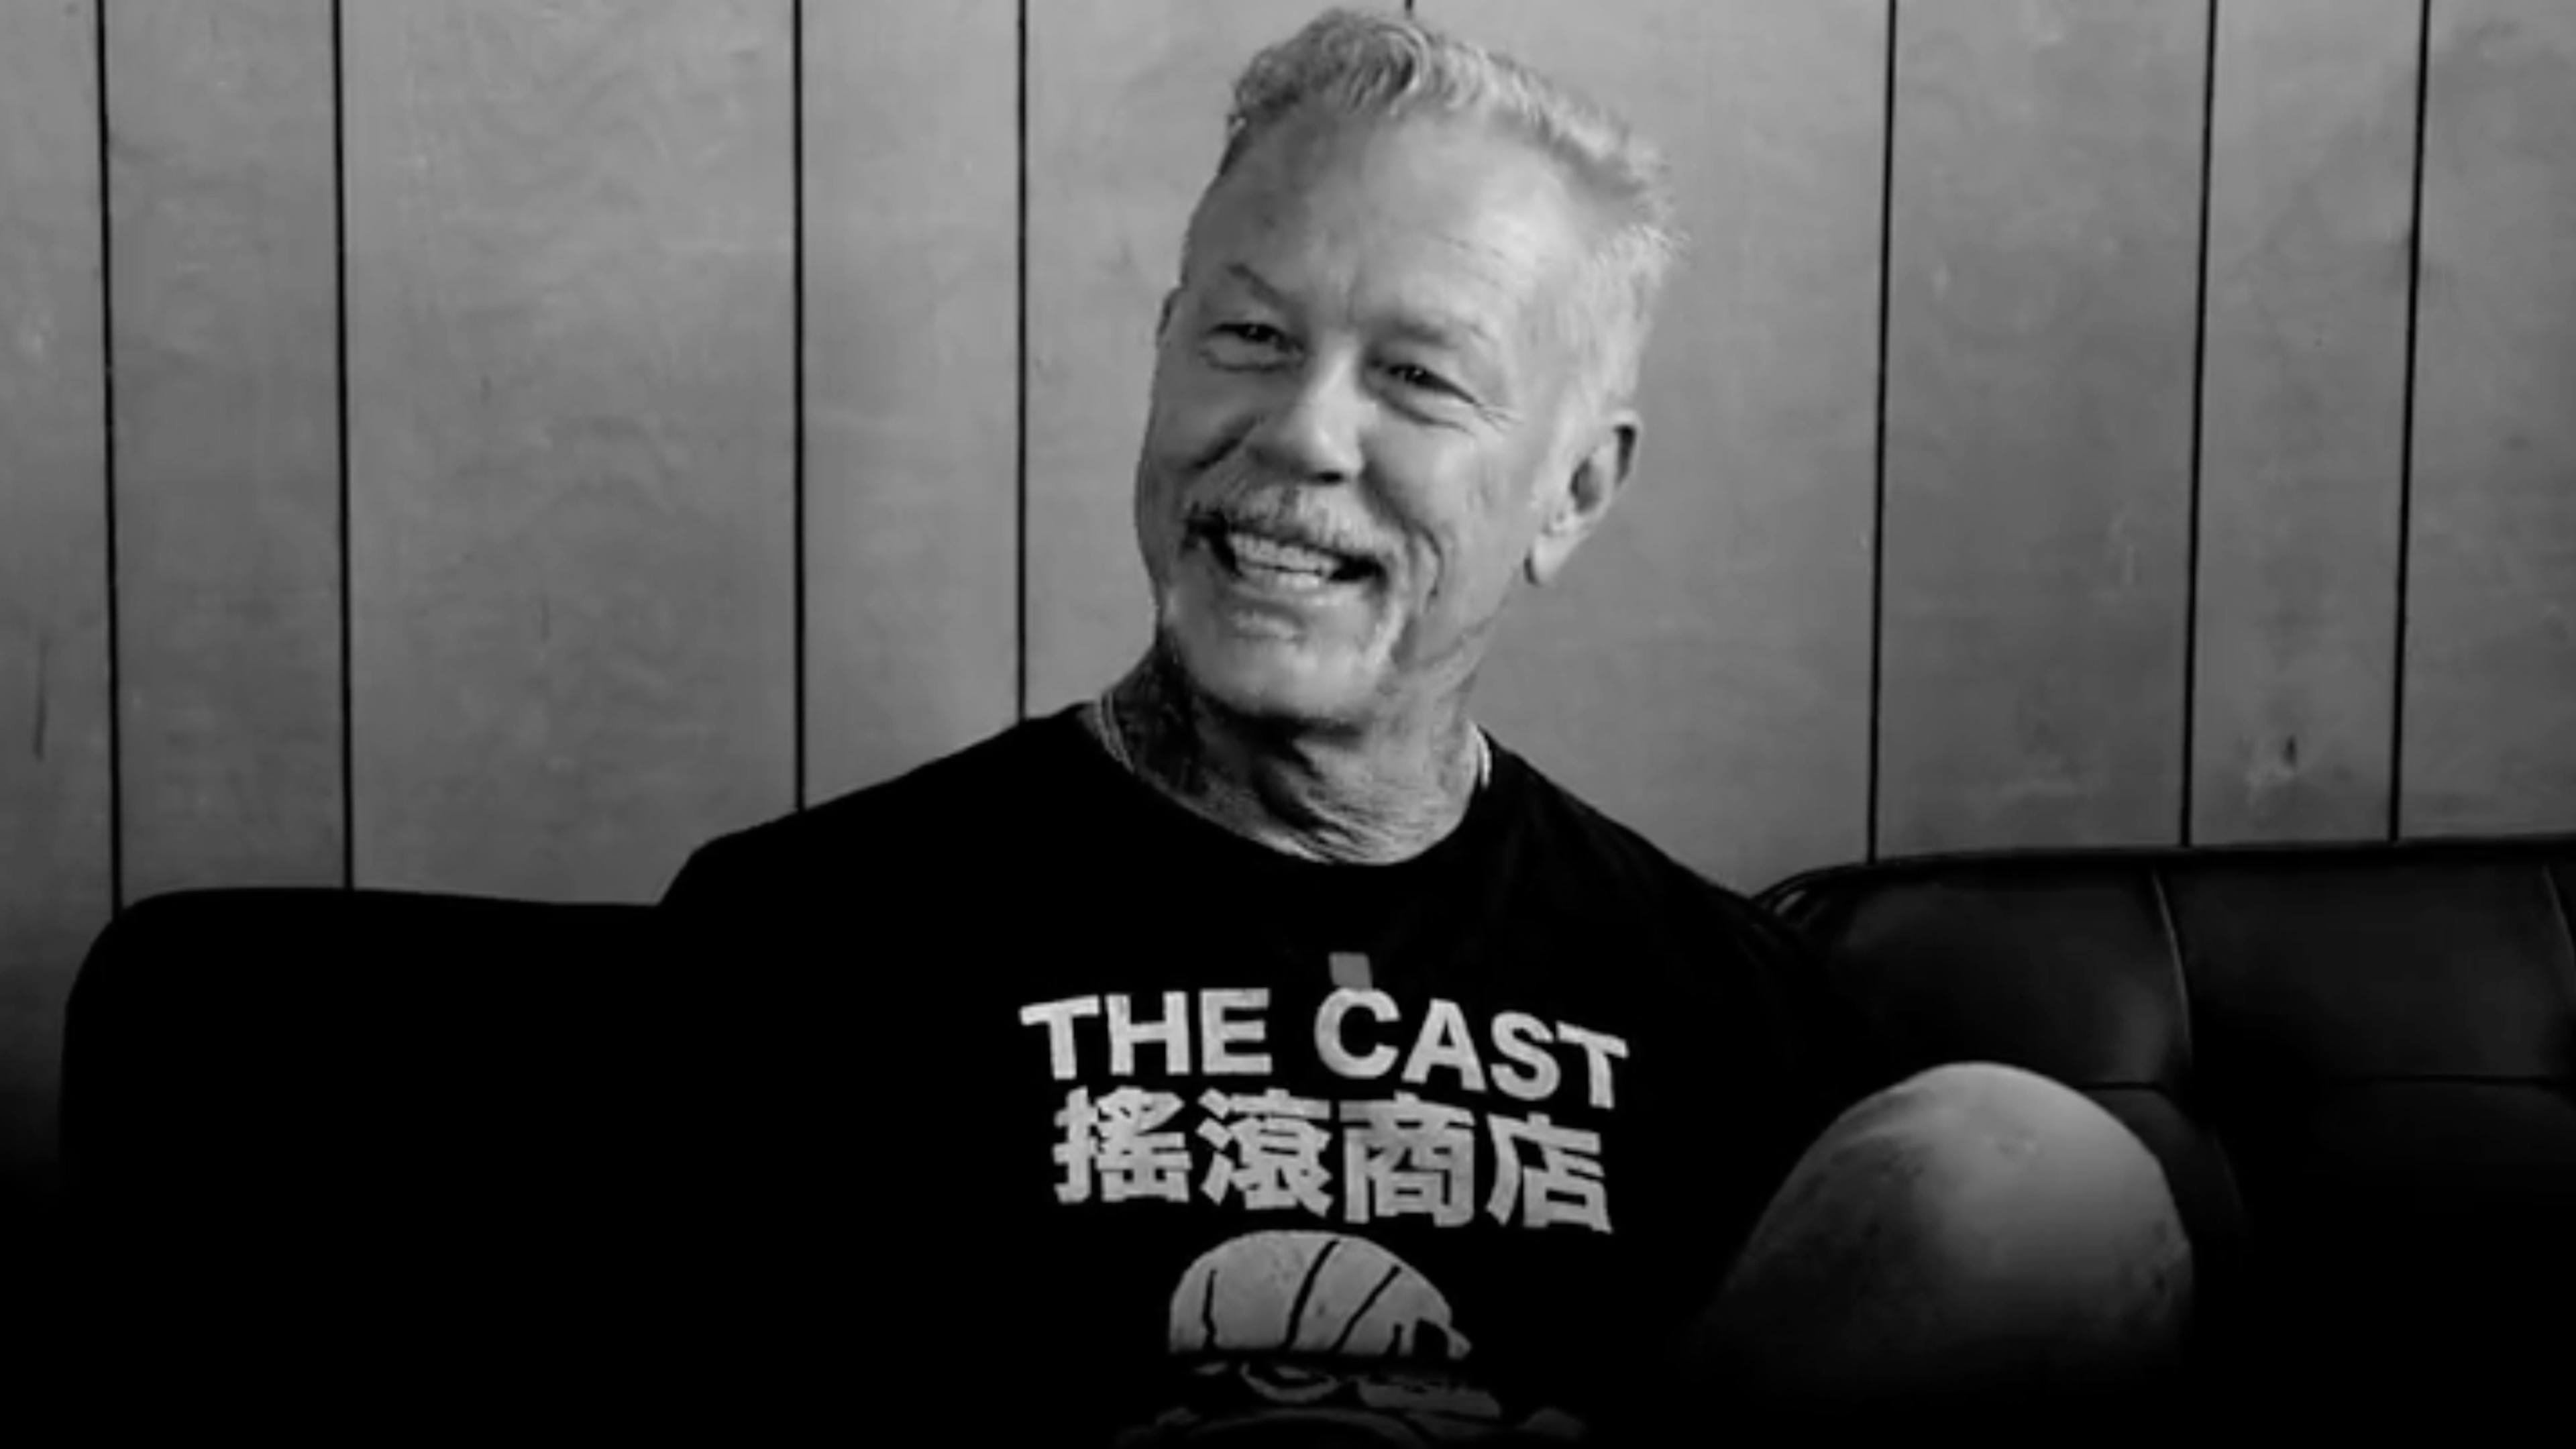 James Hetfield on watching Judas Priest at Power Trip: “We’re fans at the end of the day”